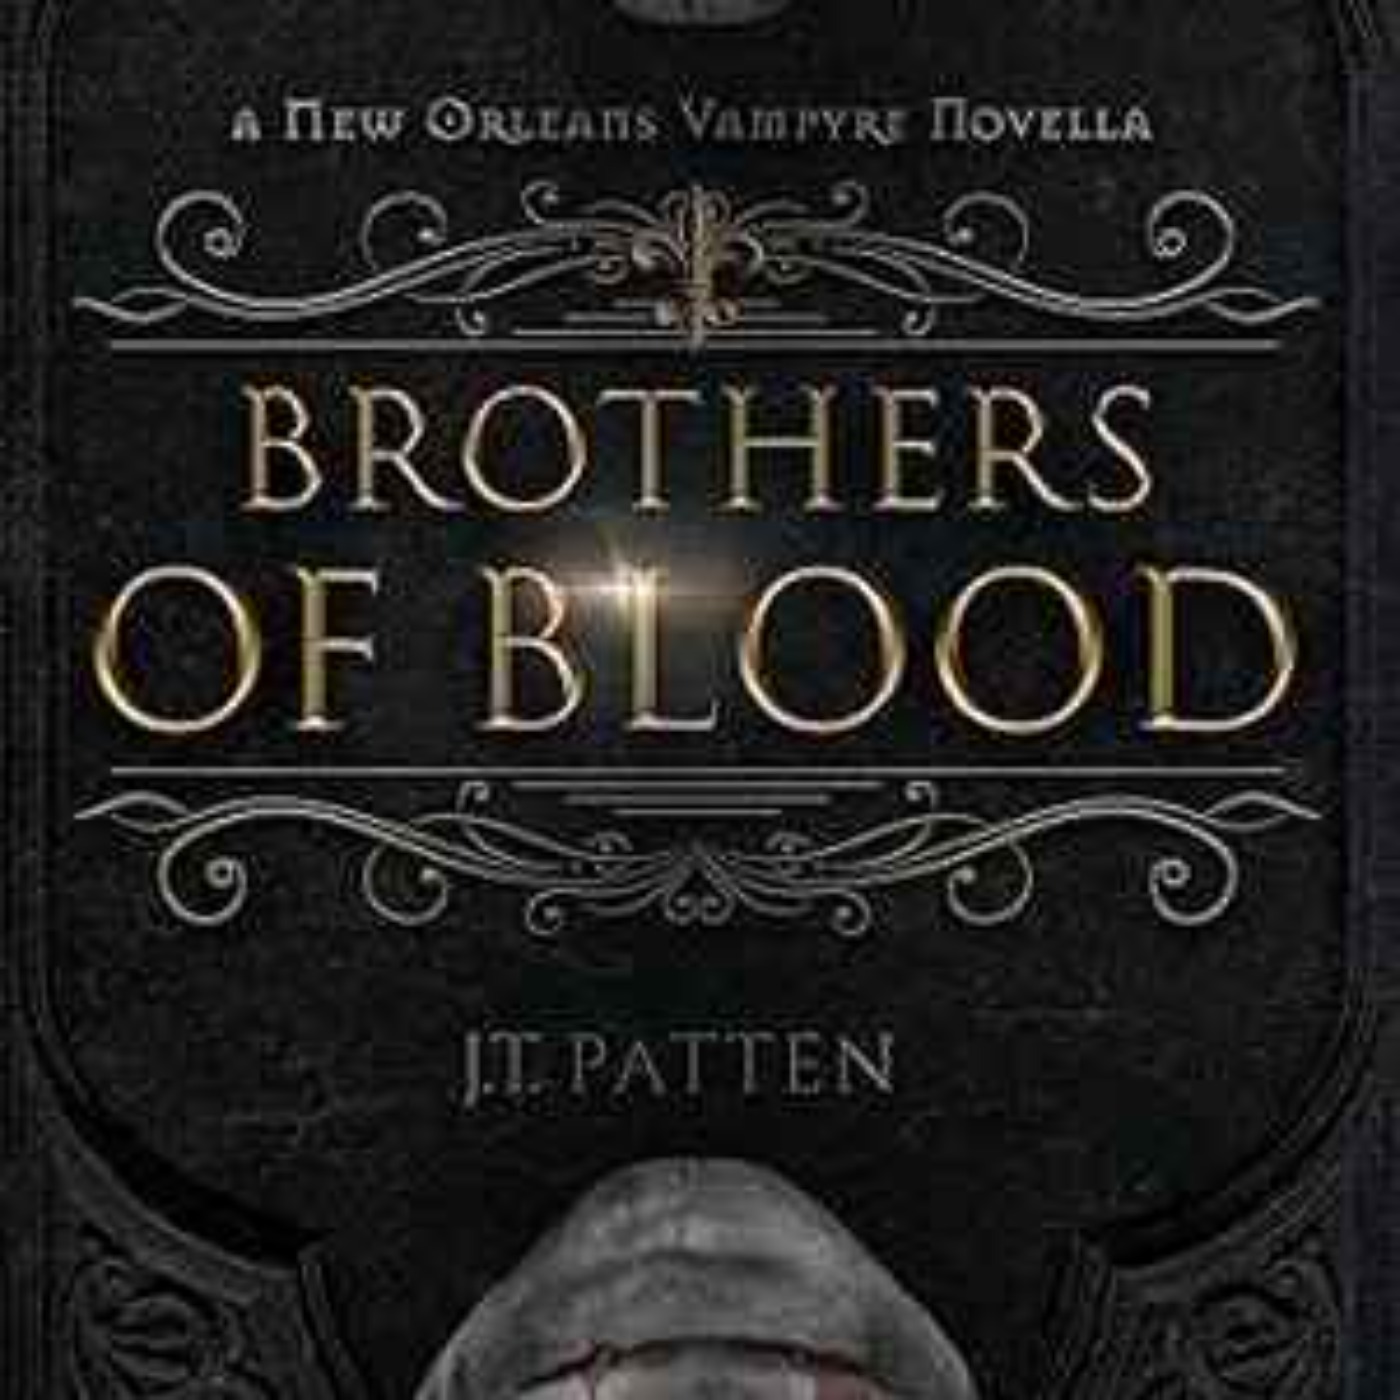 JT Patten - BROTHERS OF BLOOD: A New Orleans Vampyre Novella